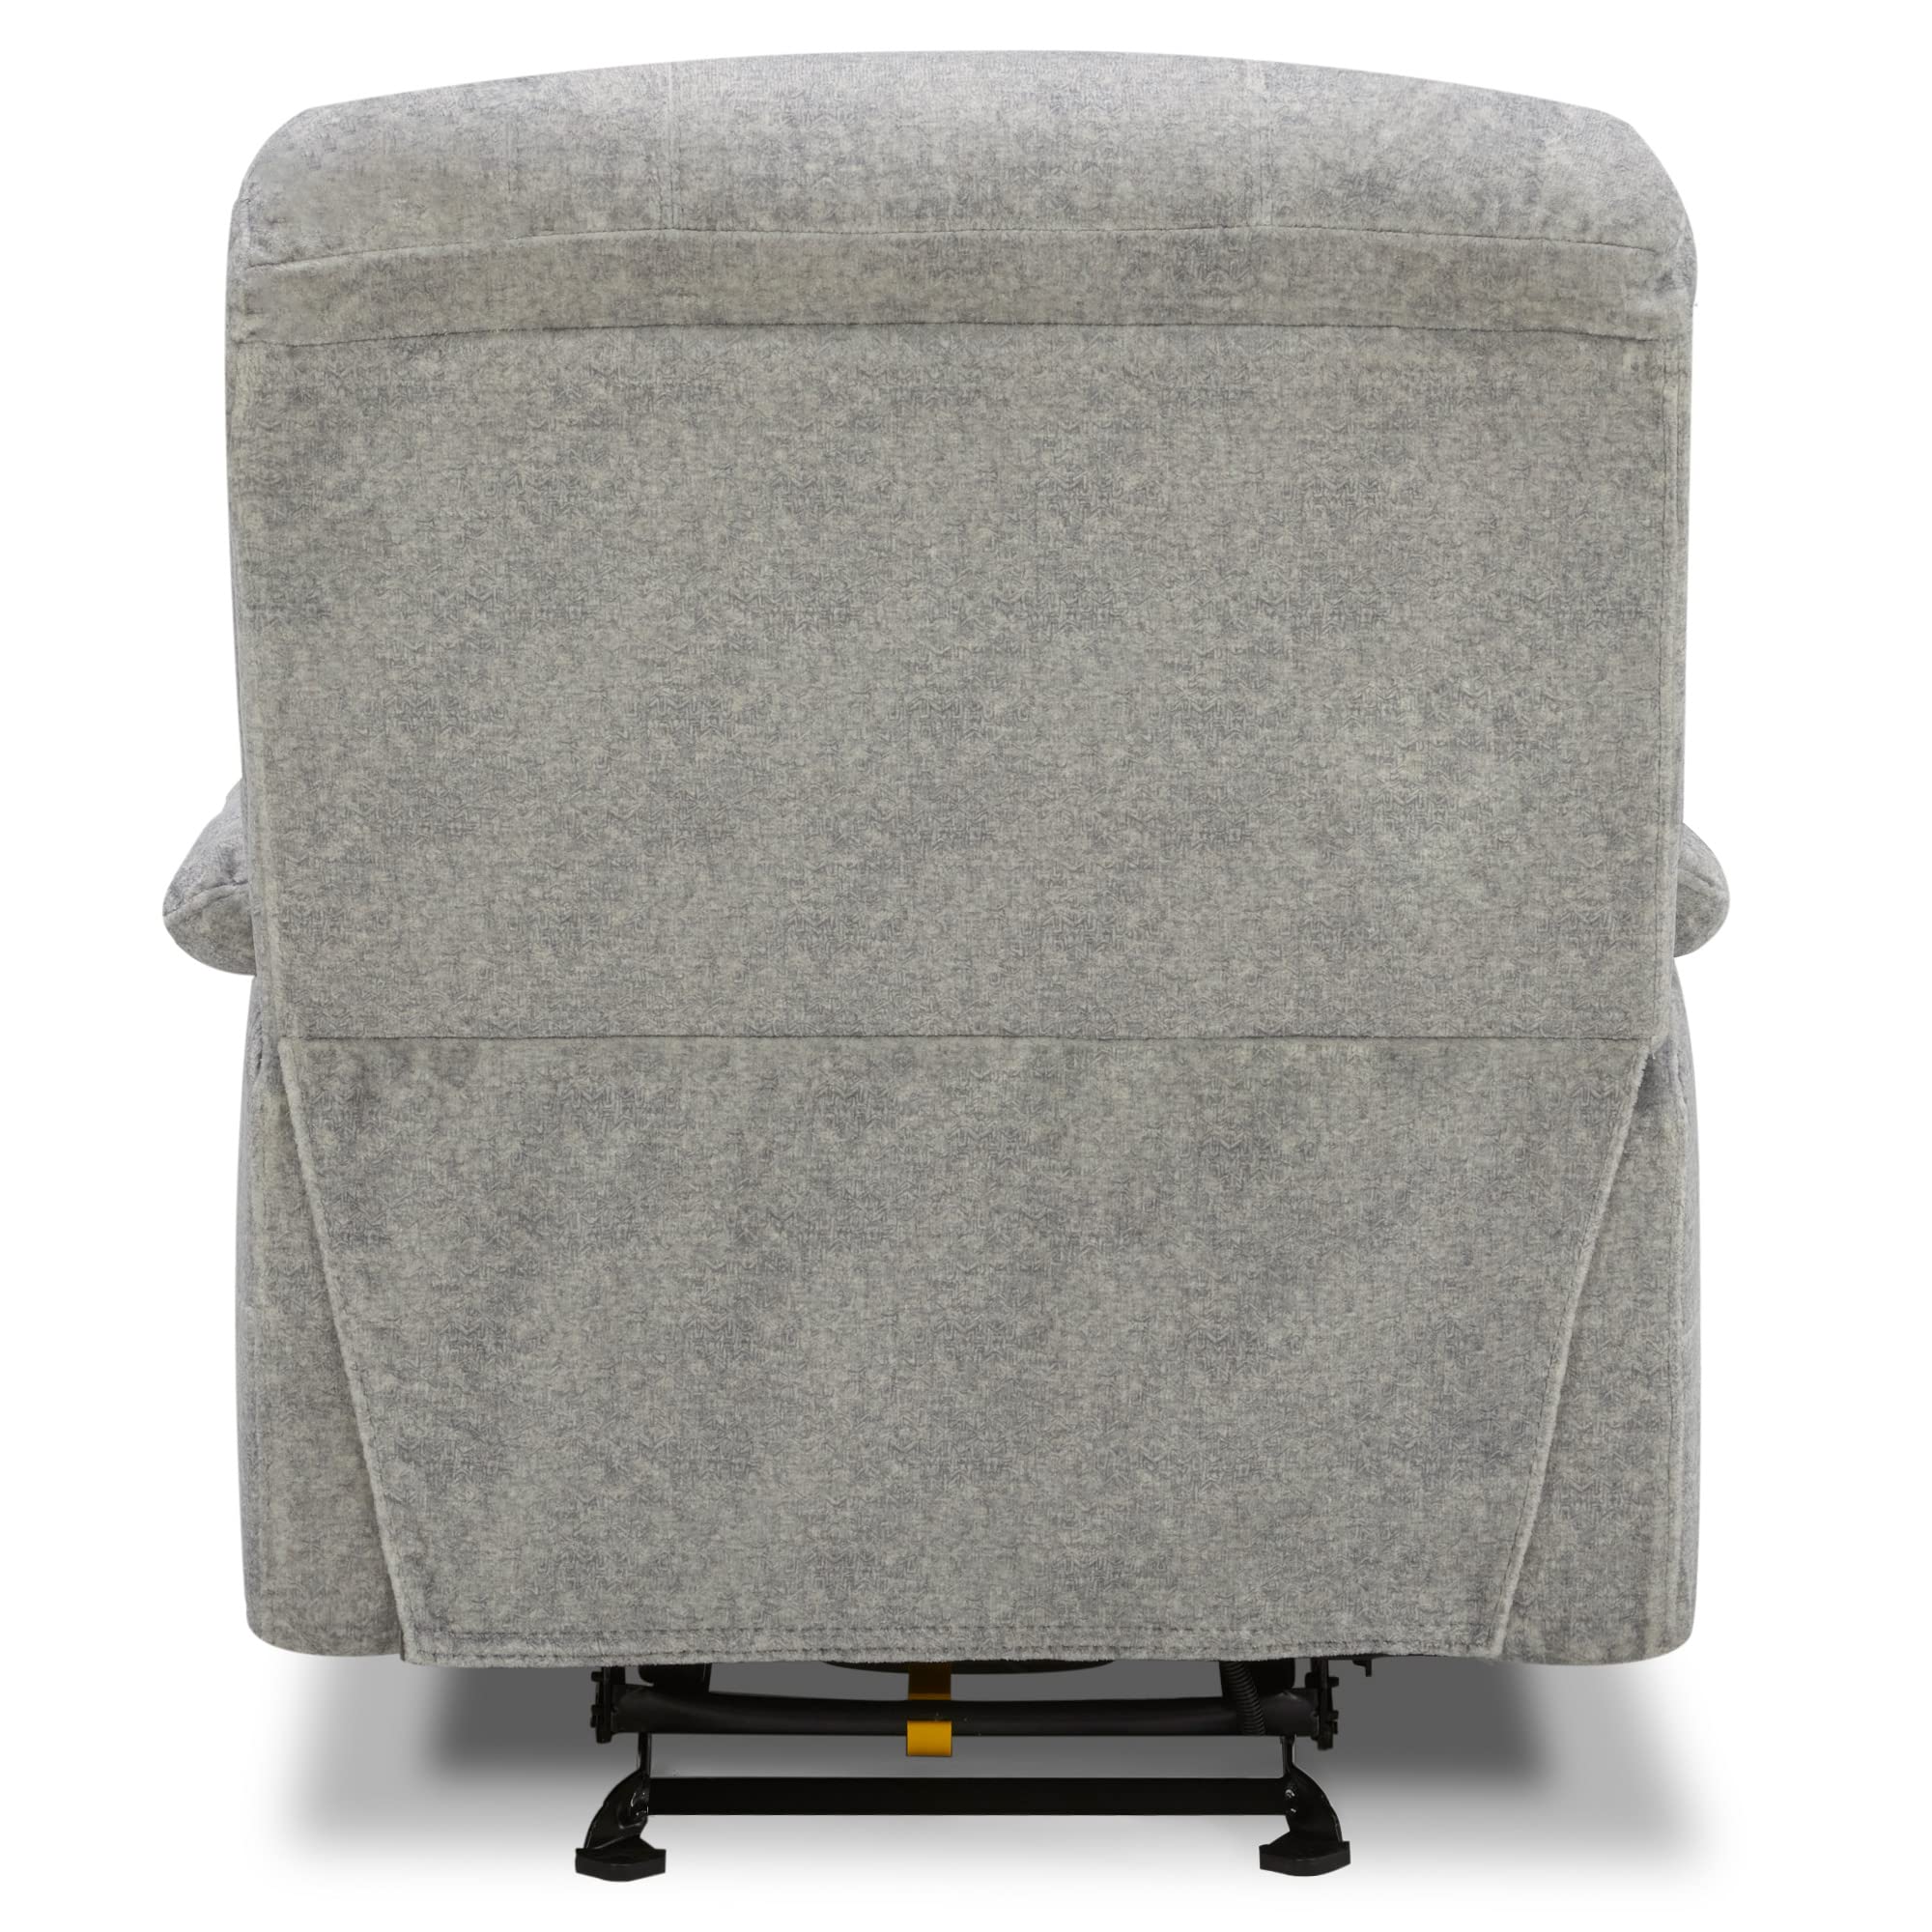 CHITA Power Recliner Chairs for Small Spaces, Glider Recliner Chair for Living Room with USB Charge Ports, Faux Fur, Light Grey